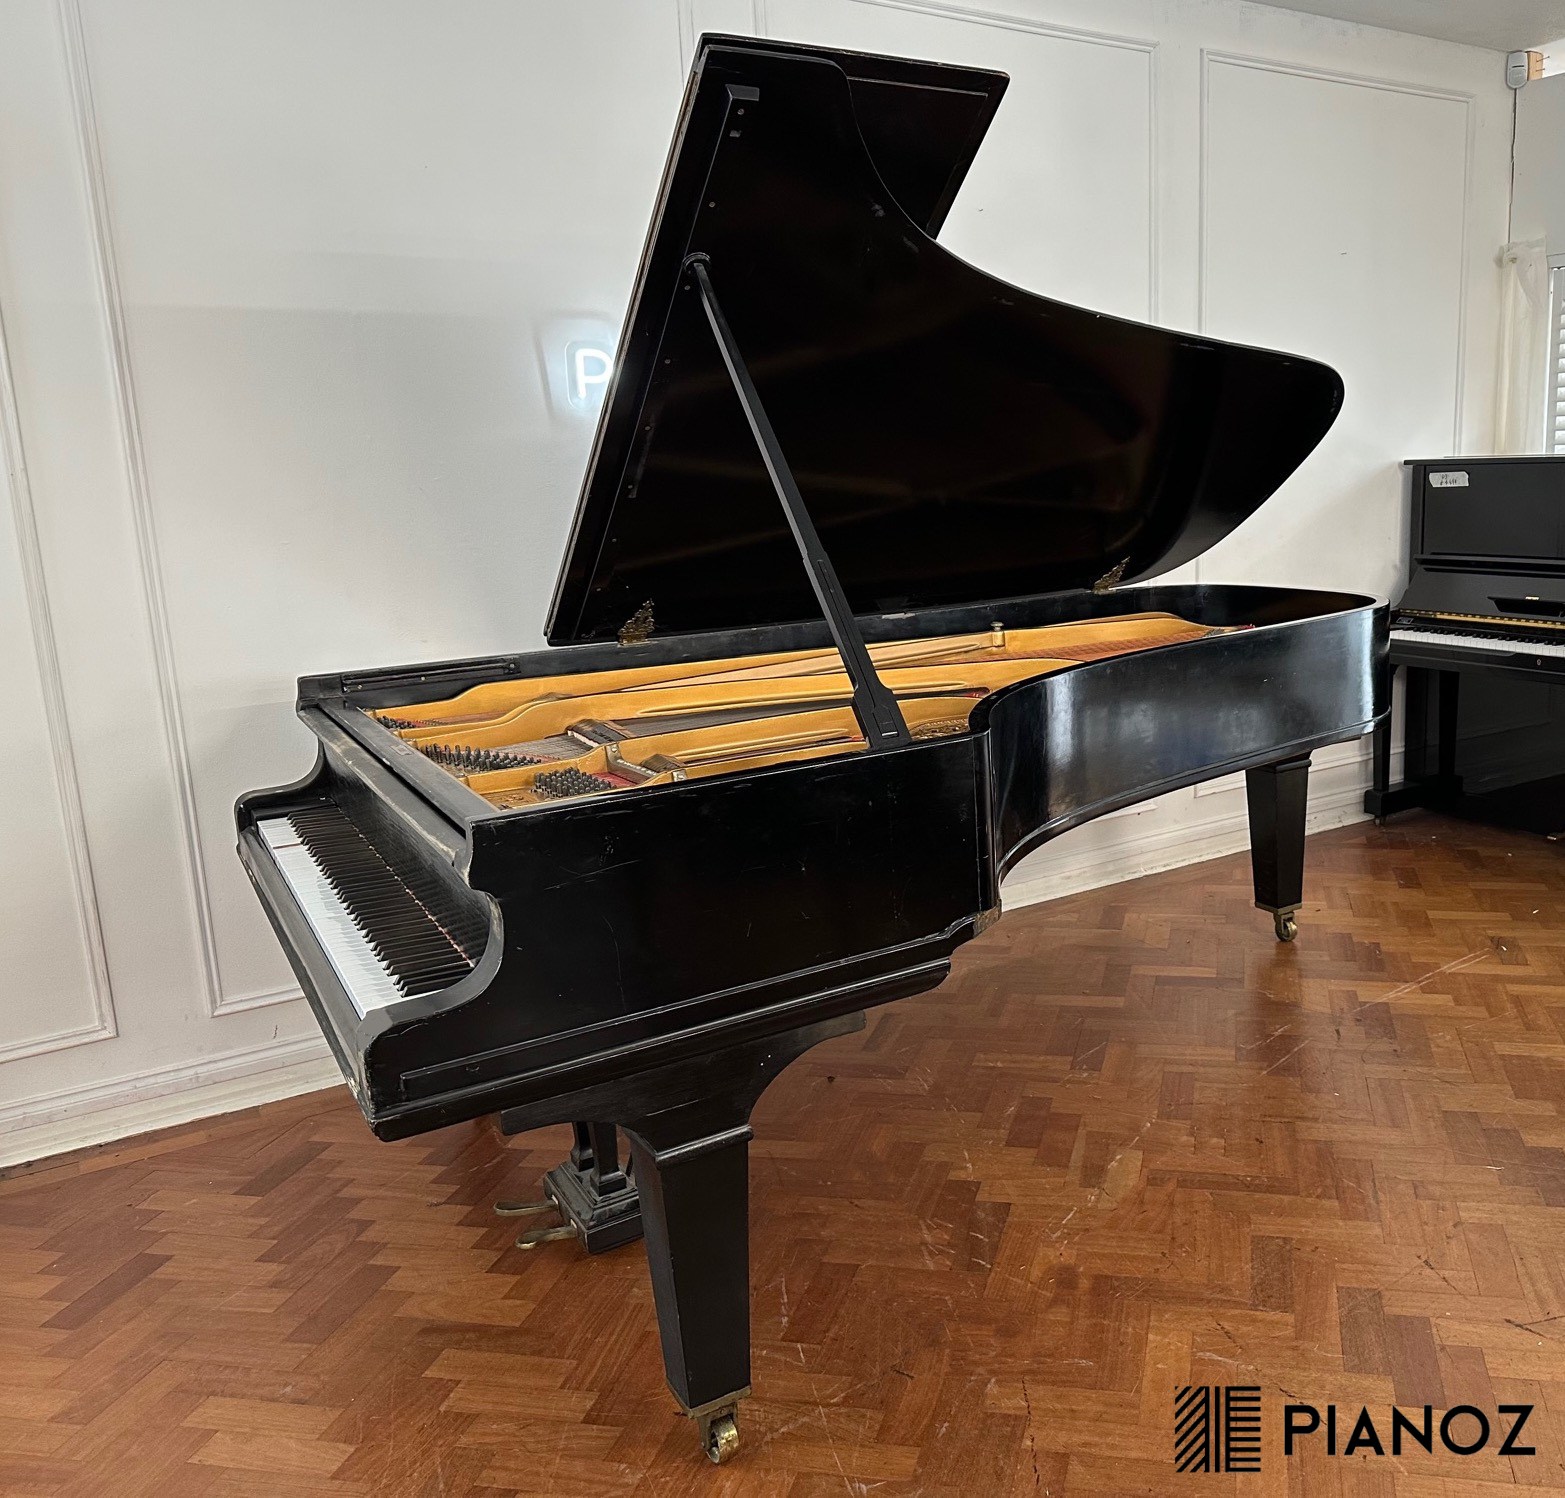 Chappell 9ft Concert Grand piano for sale in UK